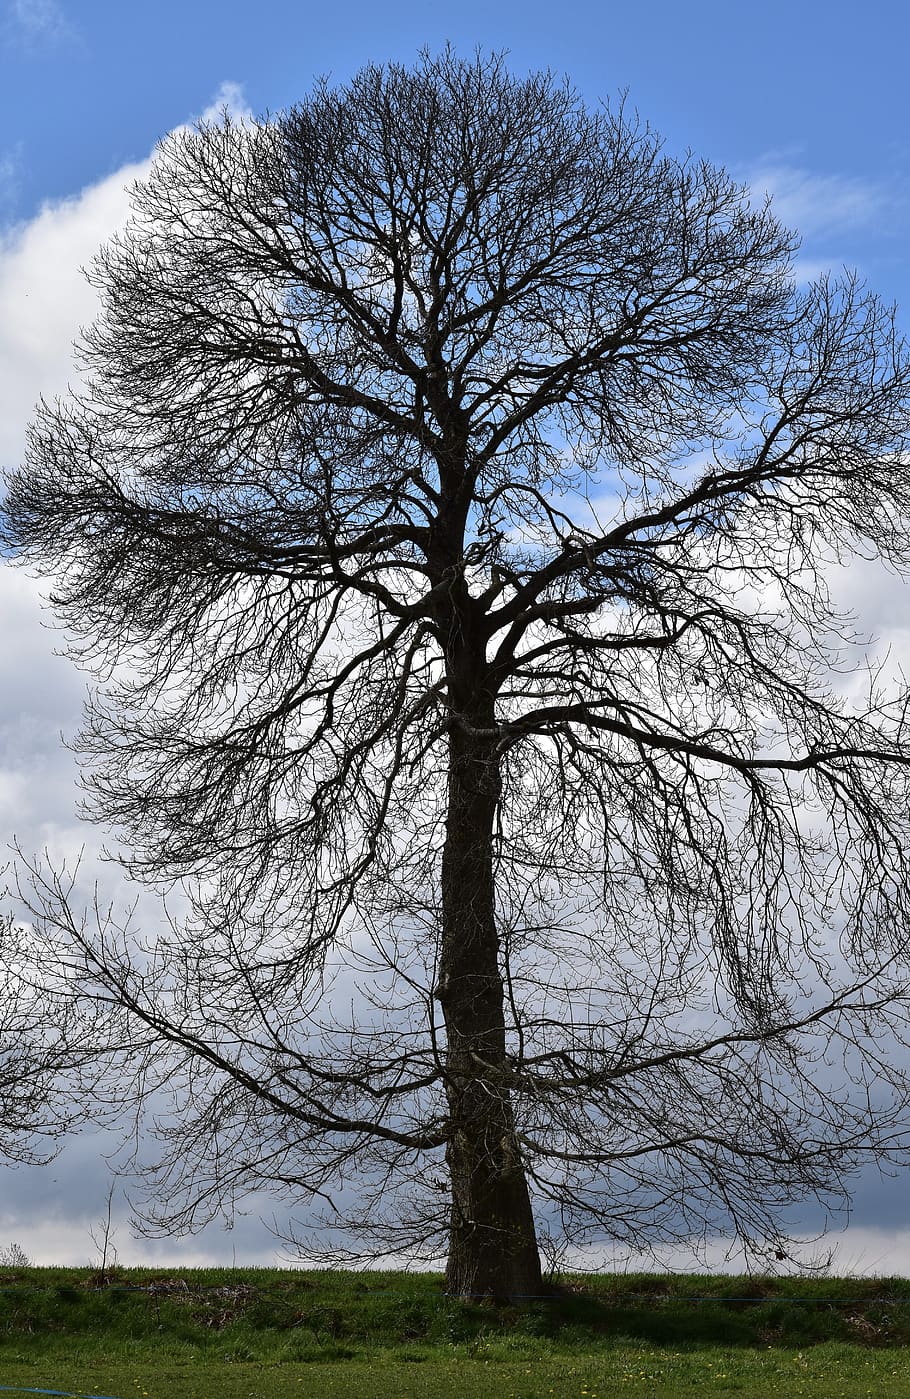 tree, chestnut, chestnut tree without leaves, nature, spring, hedgerow, sky, plant, bare tree, tranquility